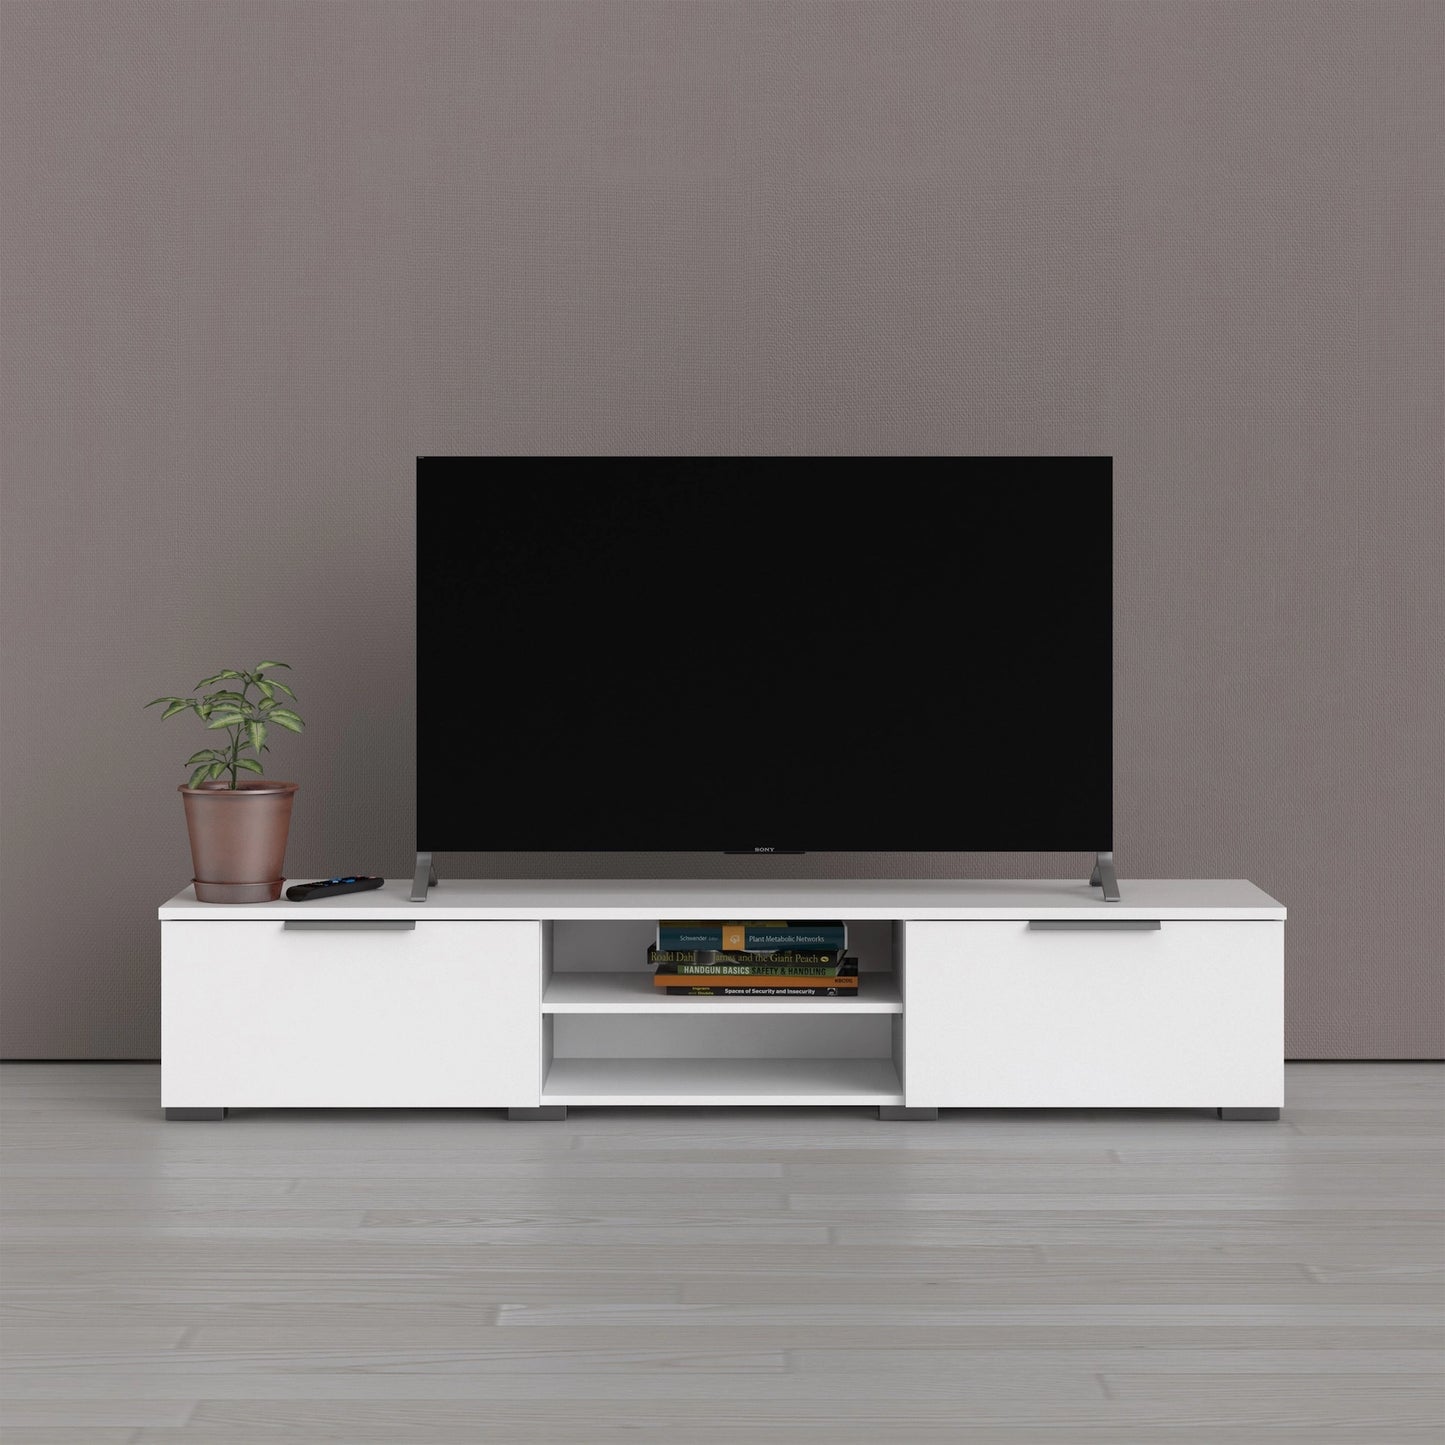 Furniture To Go Match TV Unit 2 Drawers 2 Shelf in White